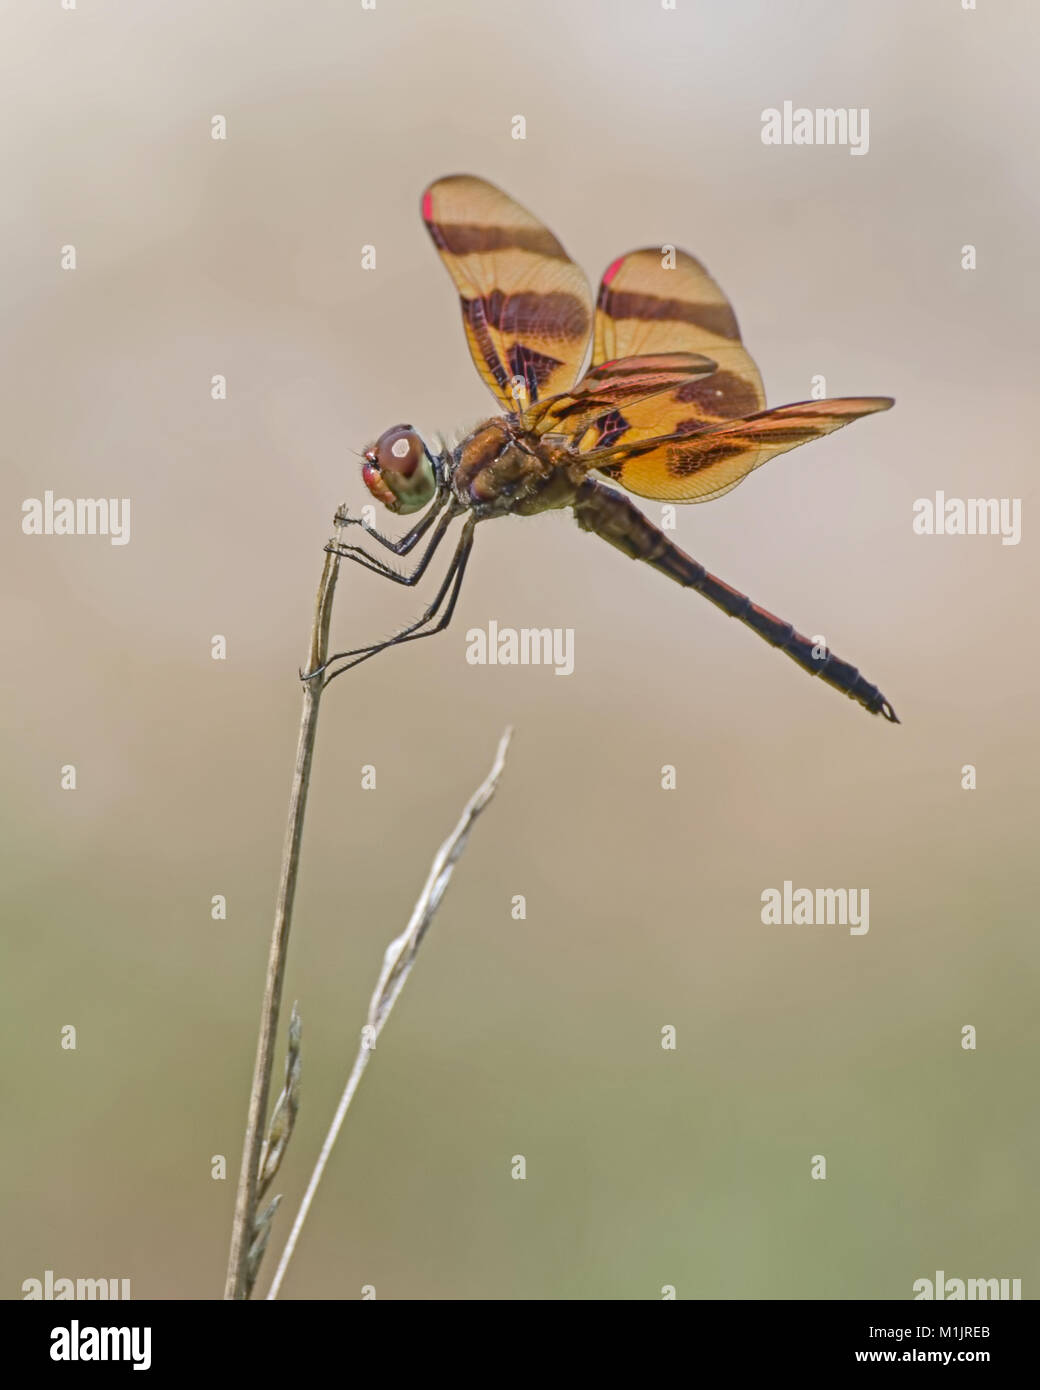 Halloween pennant dragonfly a riposo Foto Stock